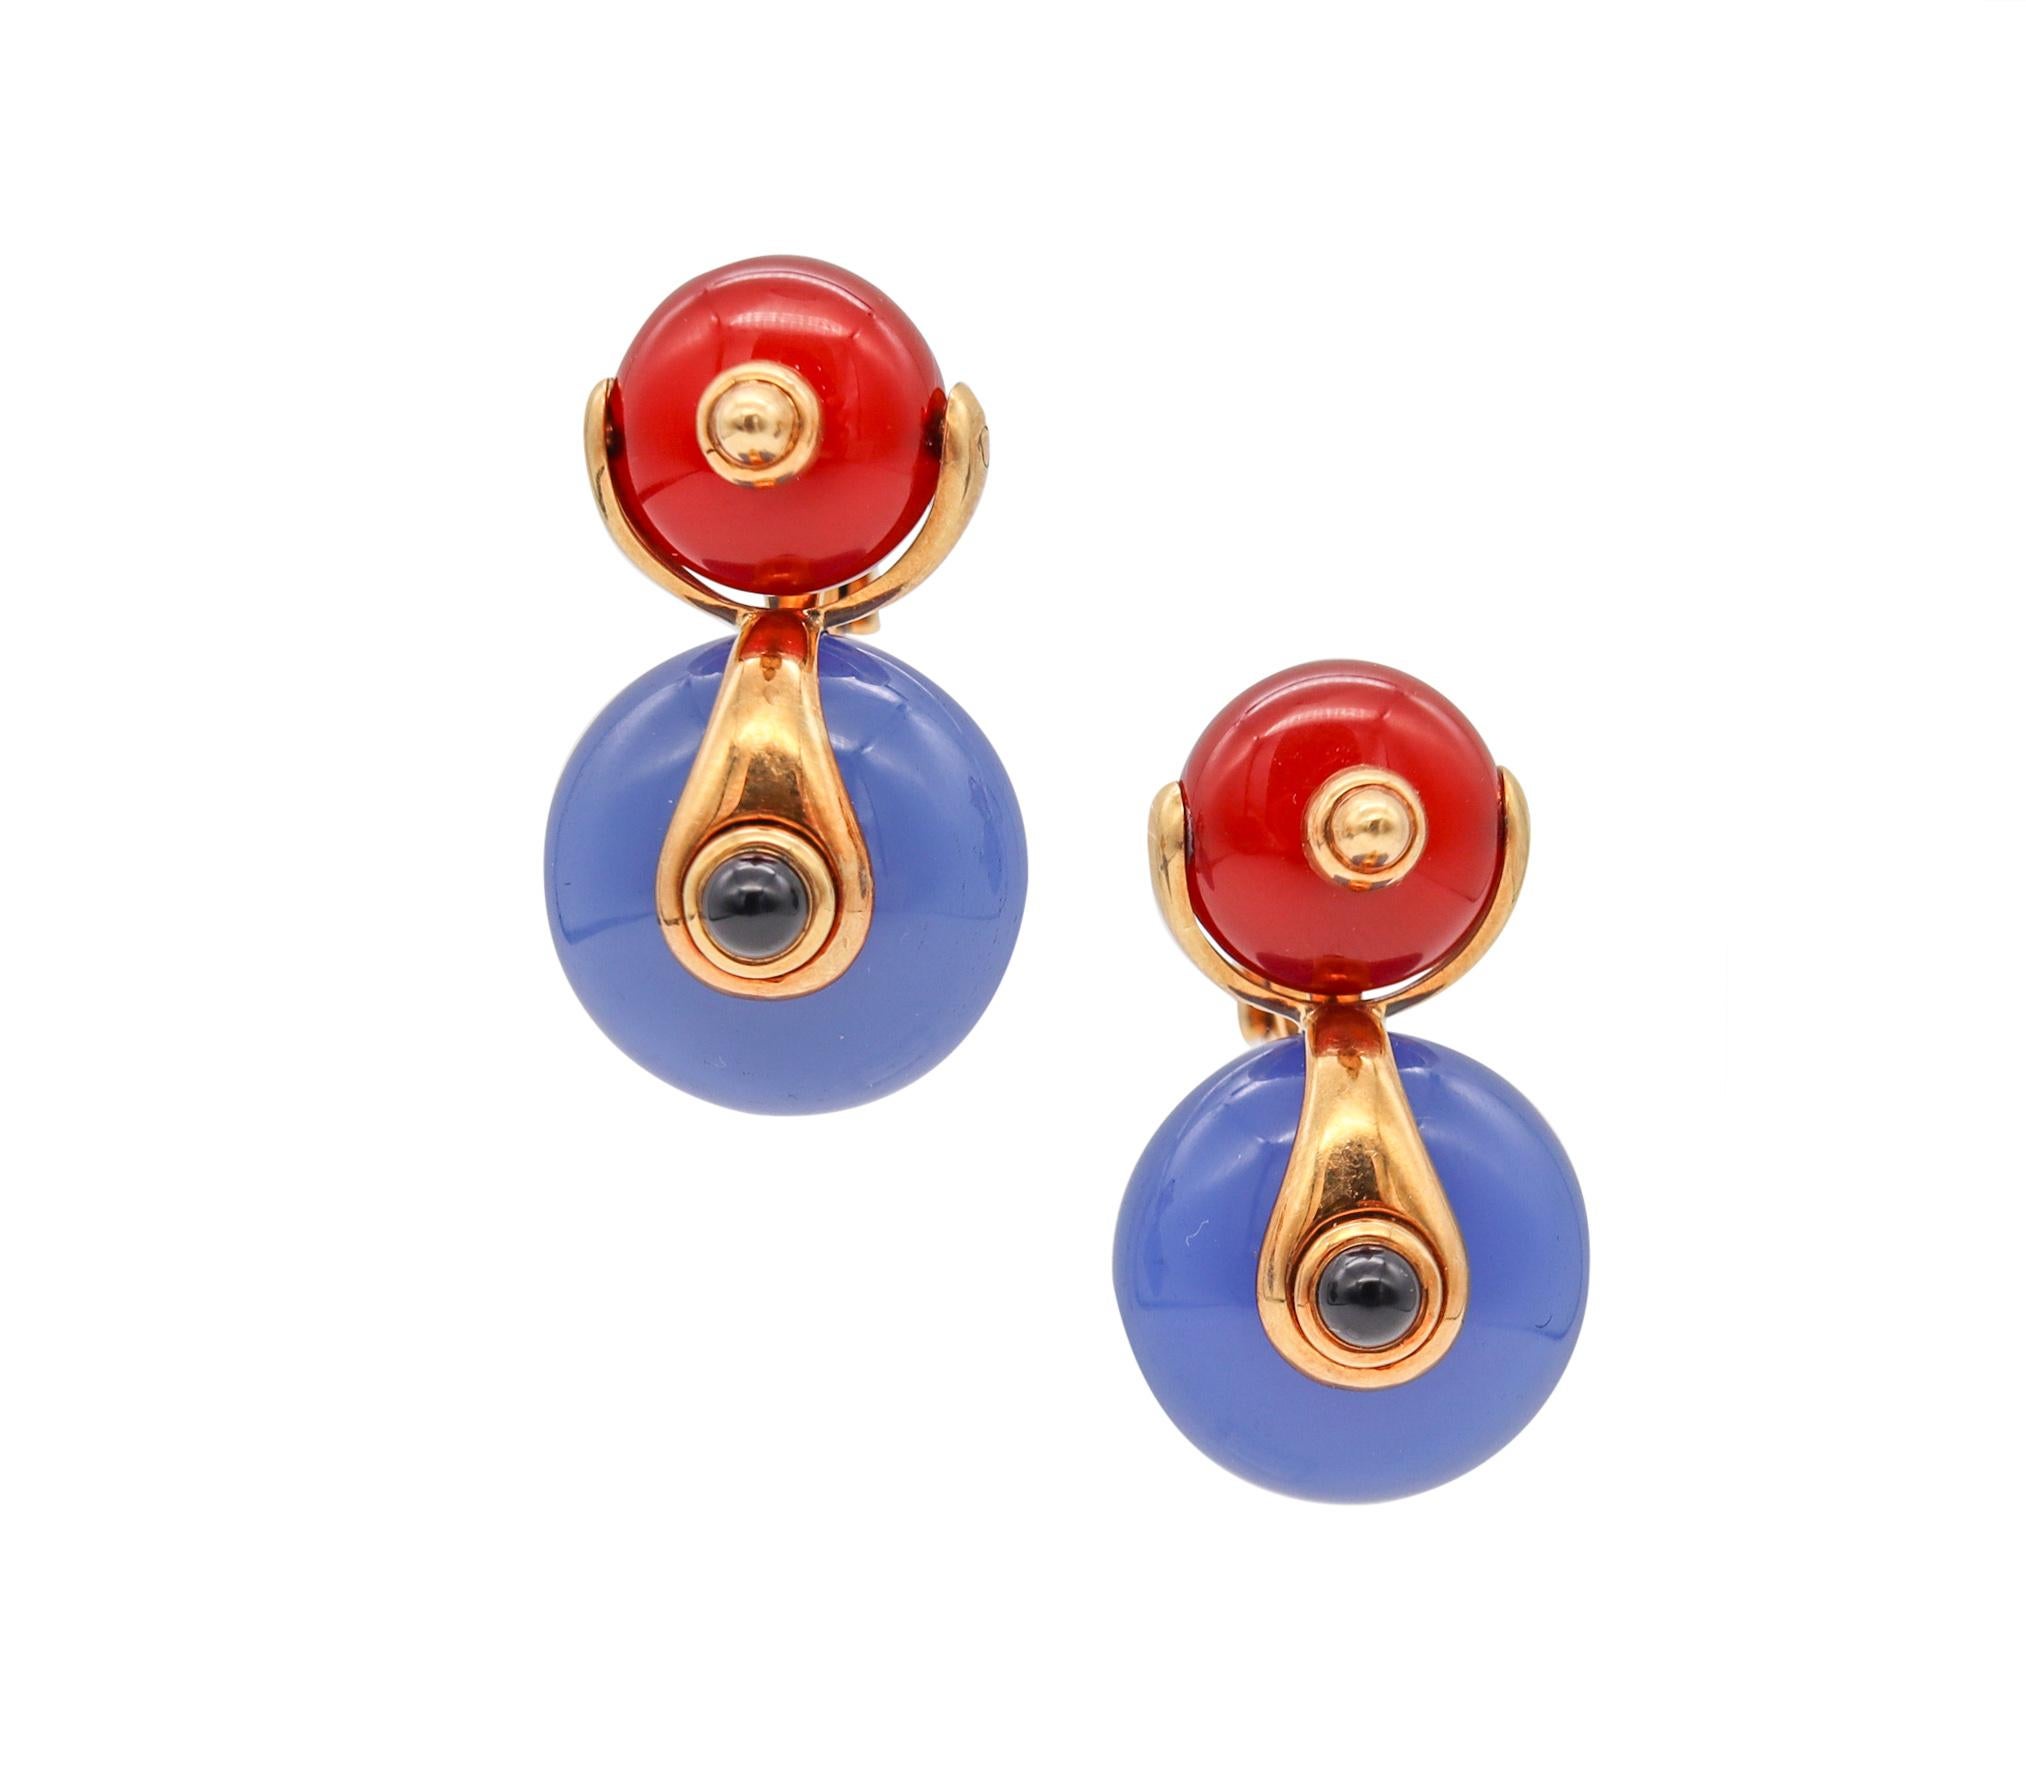 Large Cardan drop earrings designed by Marina B.

These iconic pieces are from the popular Cardan Unthreaded beads collection, designed back in the 1978 in Milan, Italy by Marina Bvlgari. This colorful drop earrings was carefully crafted in solid